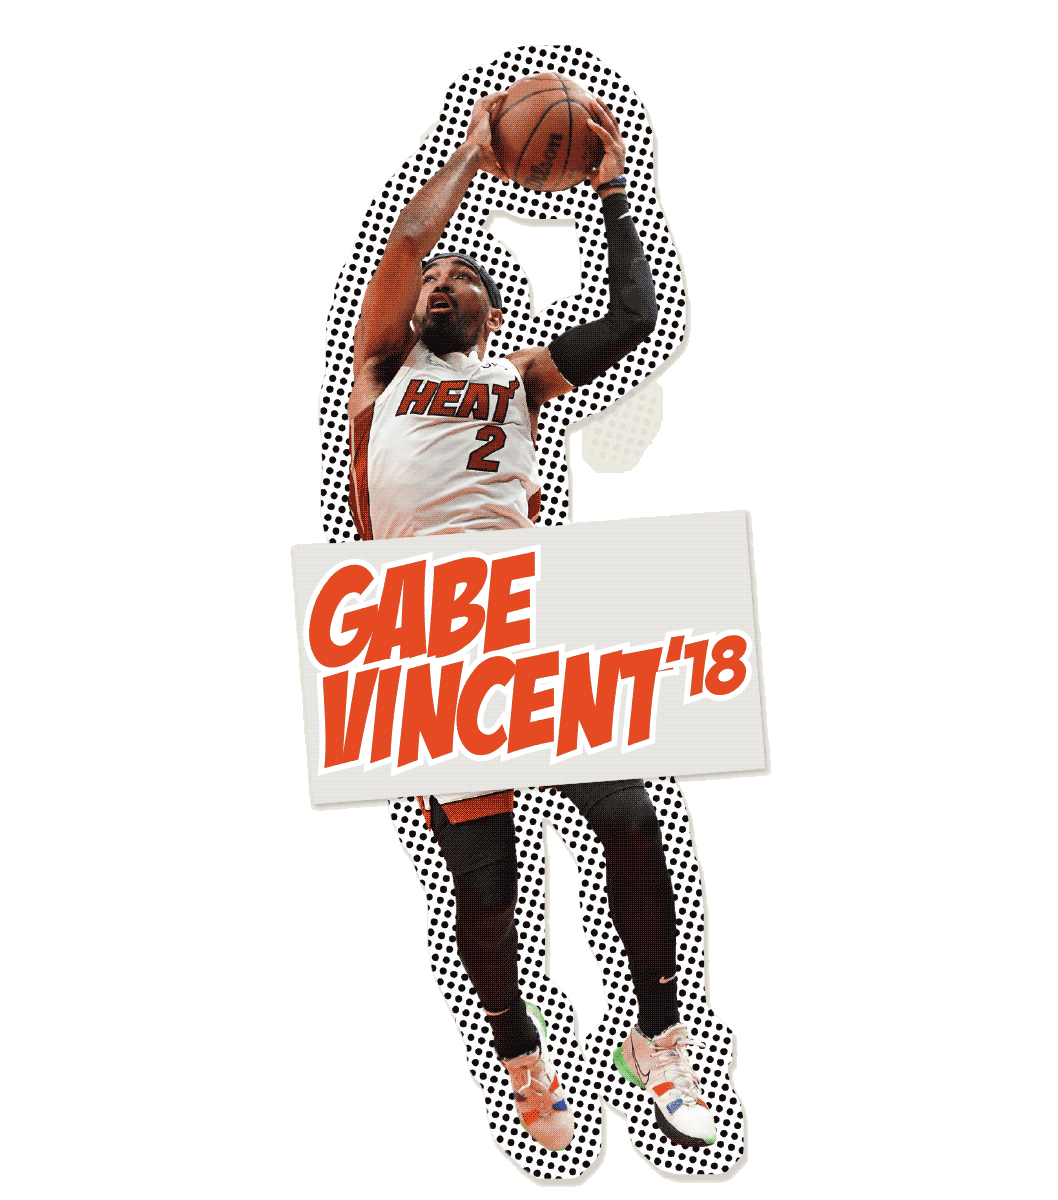 Former UCSB star Gabe Vincent agrees to a big free agent contract with the  Lakers